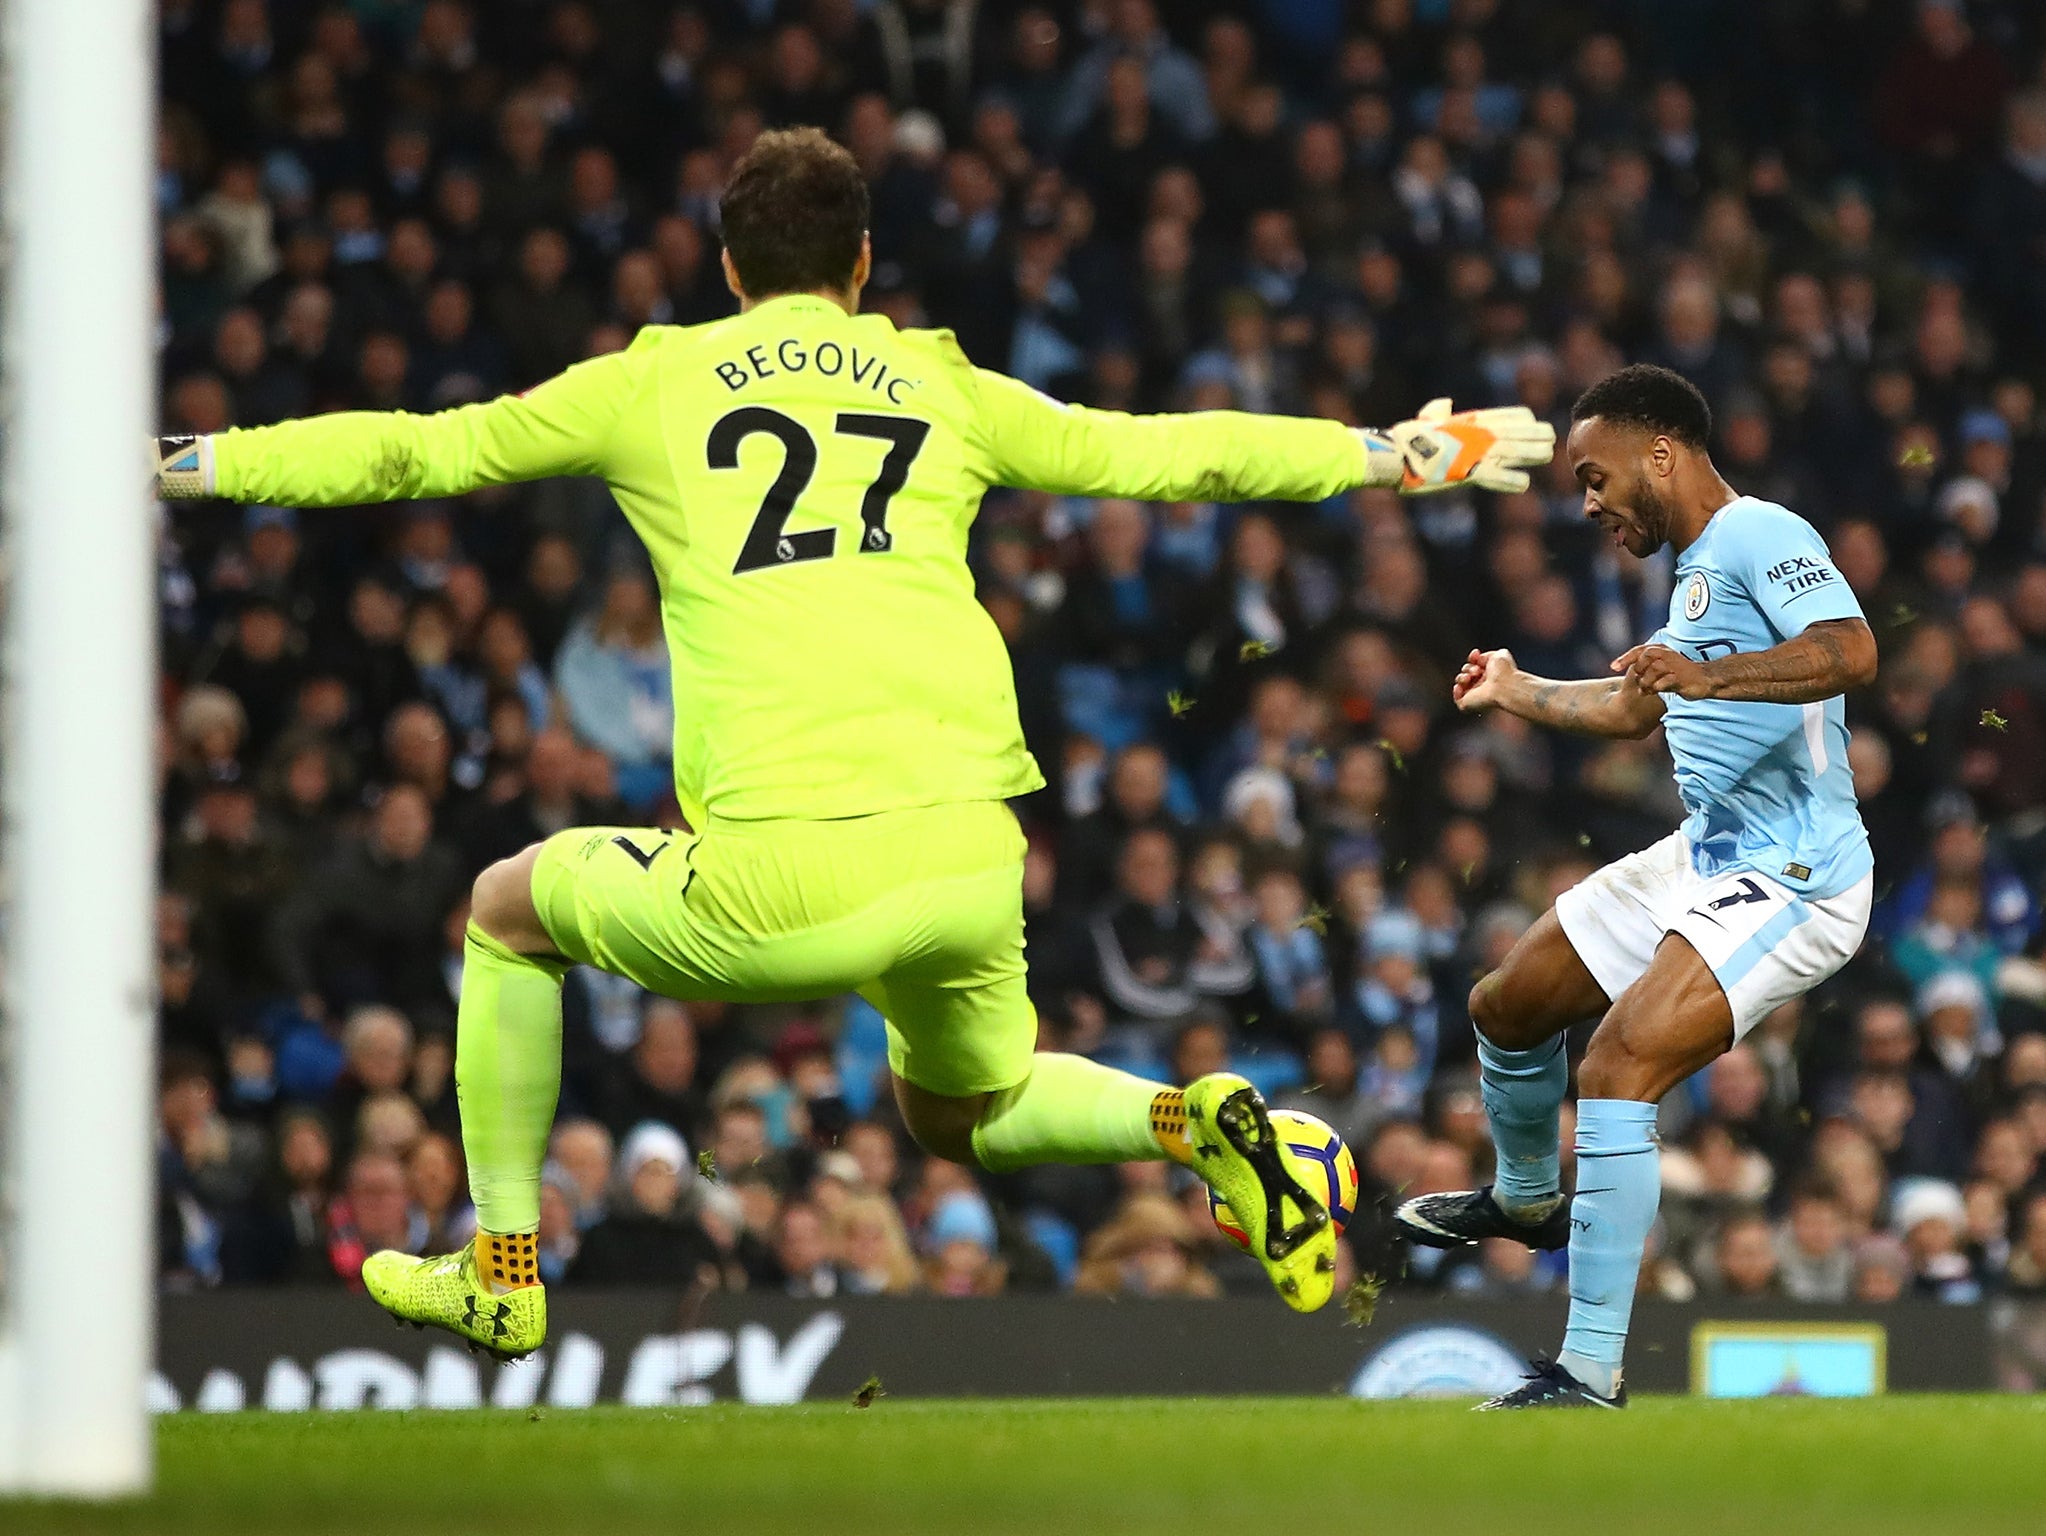 Sterling made it two with a close-range finish